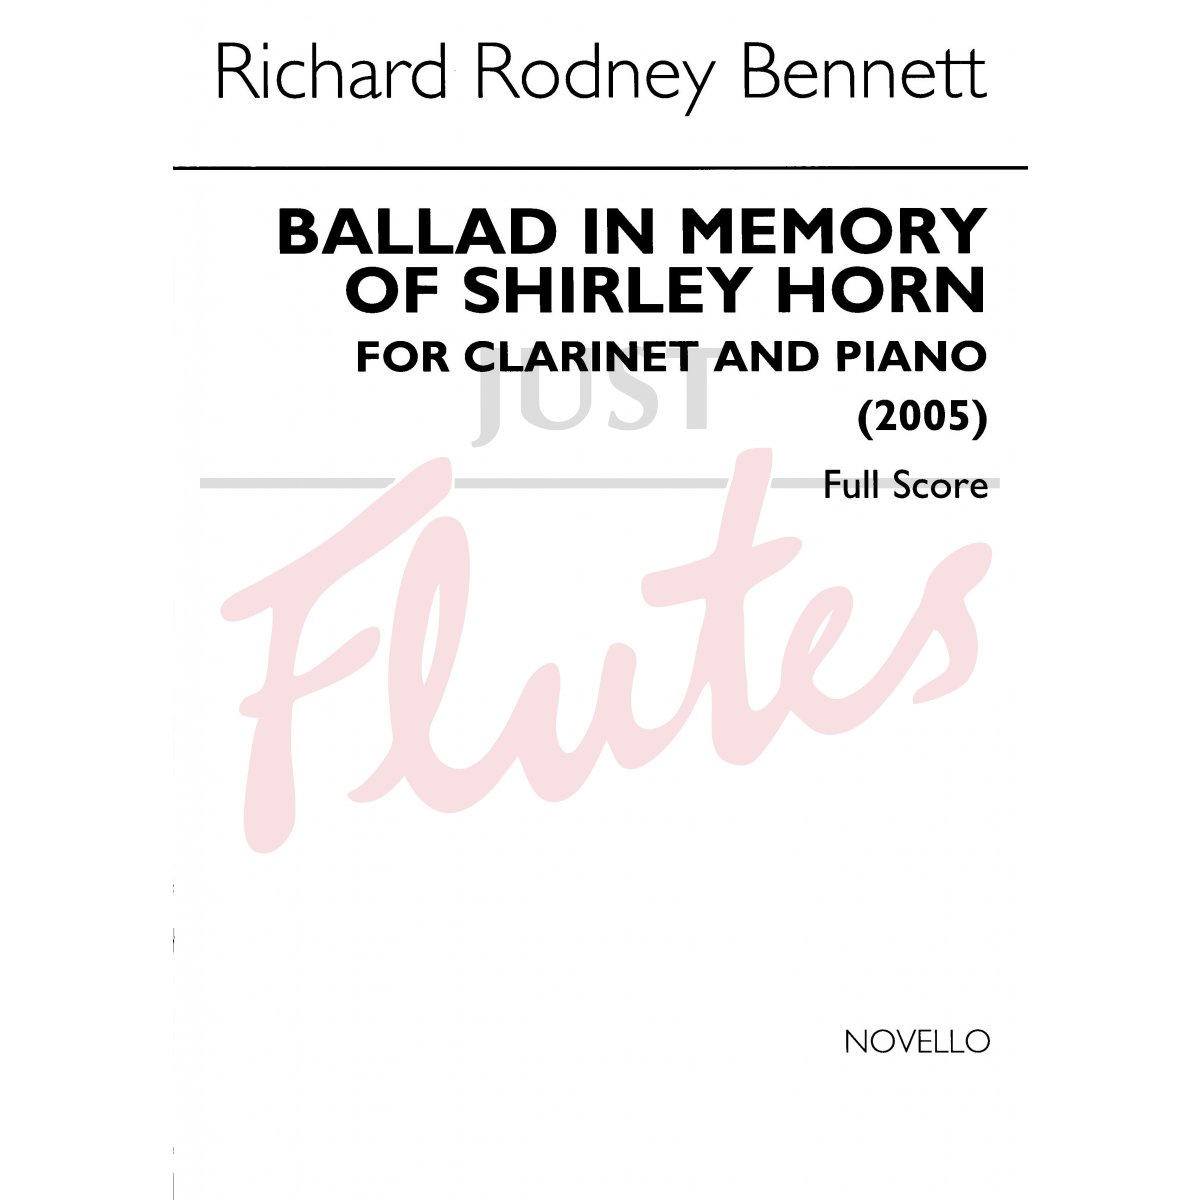 Ballad in Memory of Shirley Horn for Clarinet and Piano